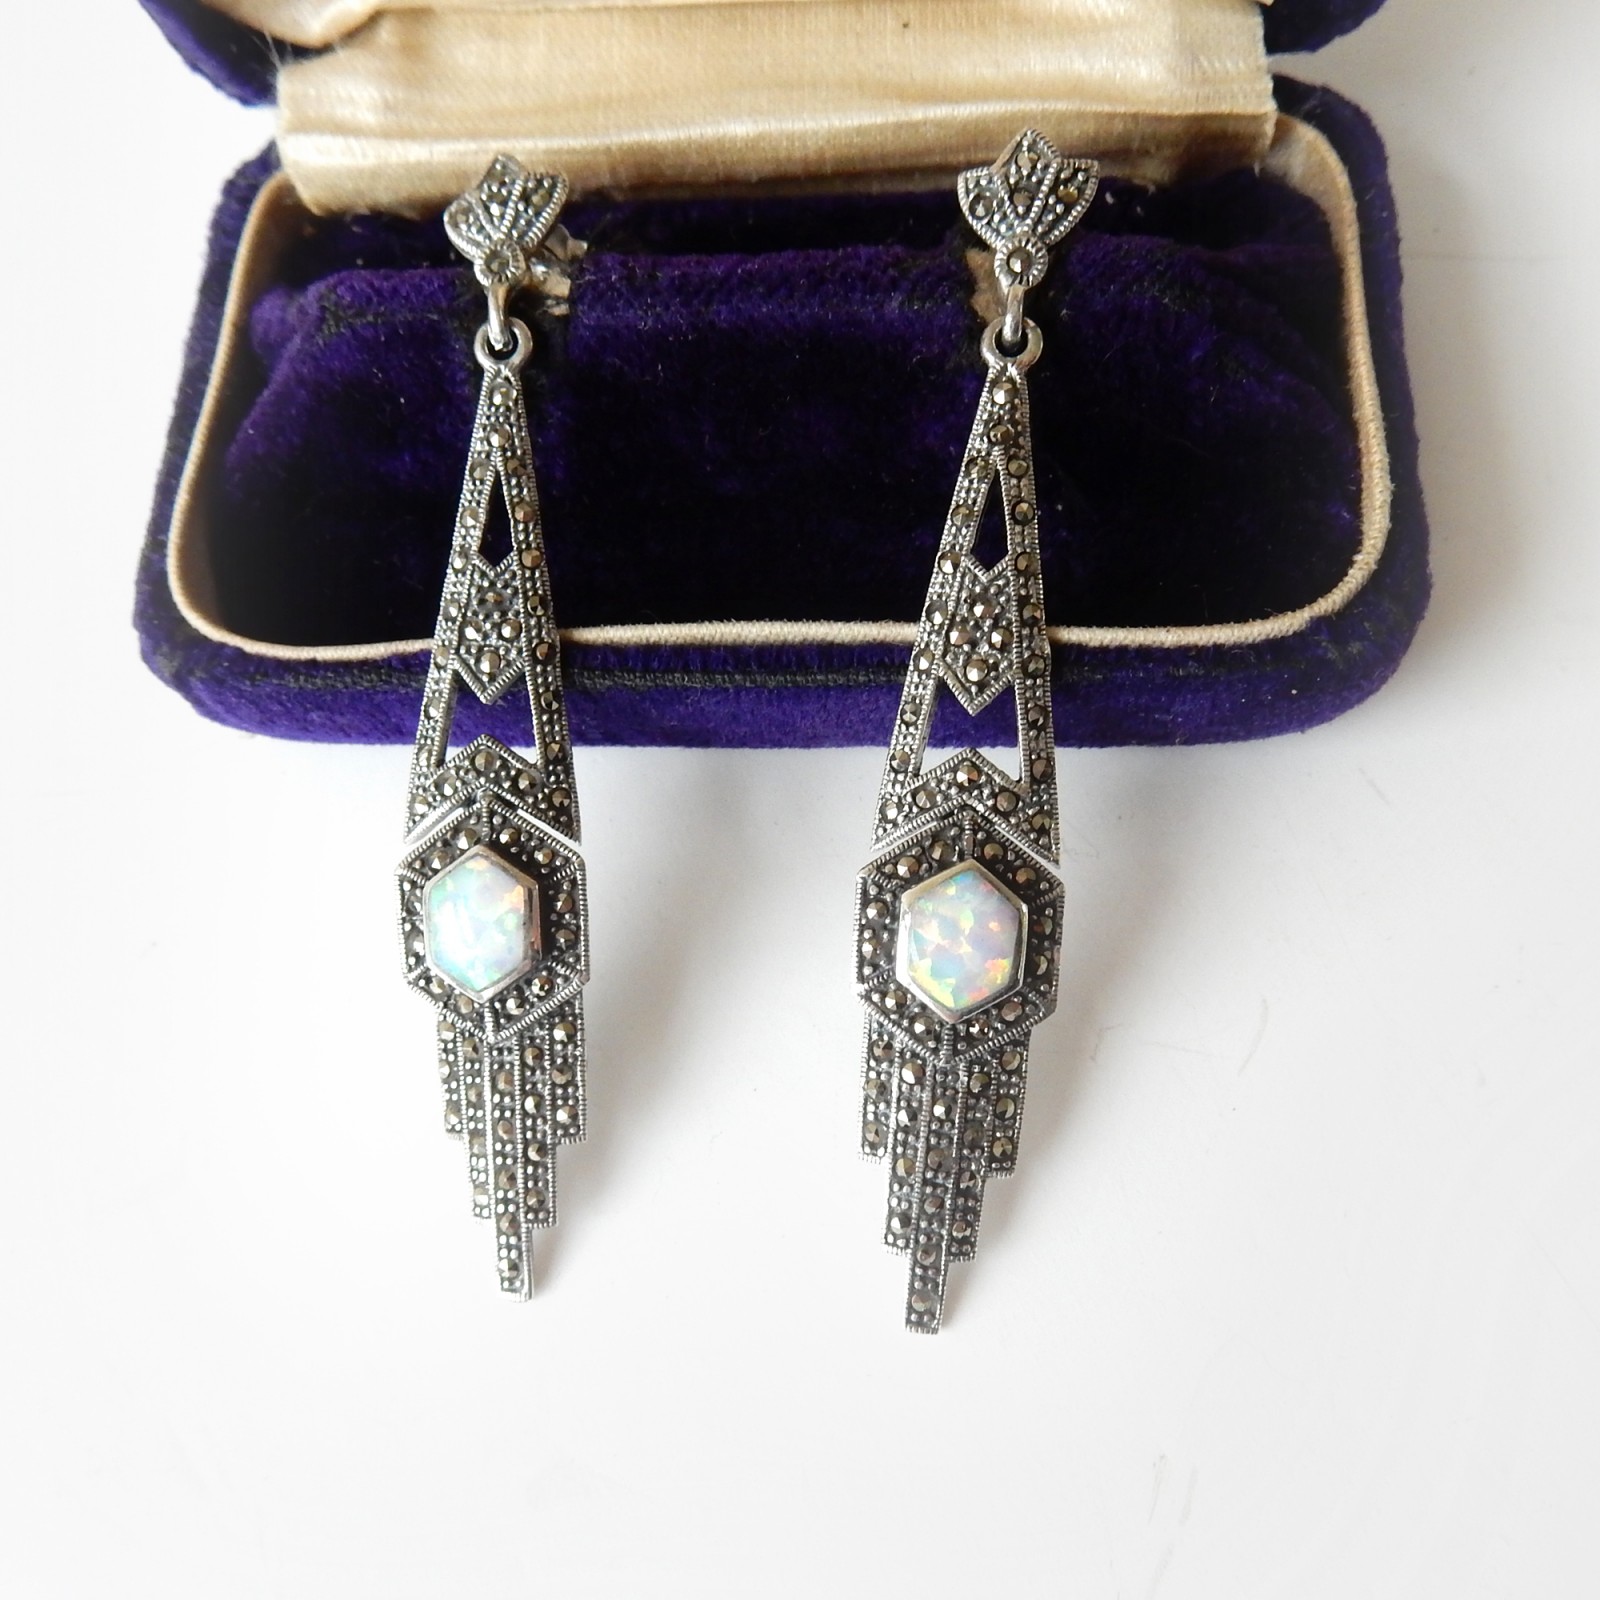 Photo of Art Deco Opal Marcasite Earring Solid Silver